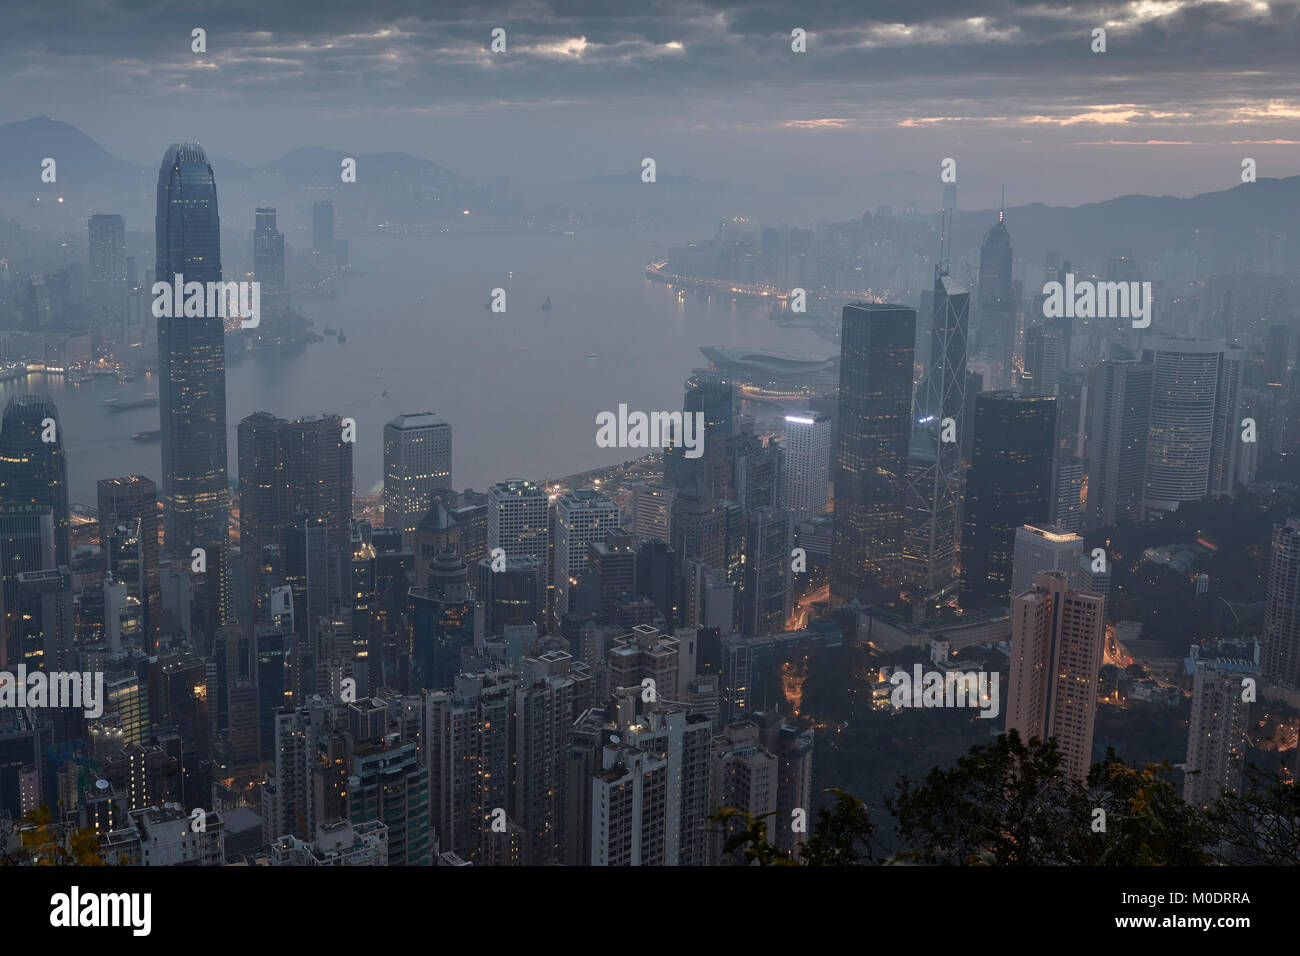 Aerial View Of The Hong Kong Skyline At Sunrise, Viewed From The Peak. Stock Photo